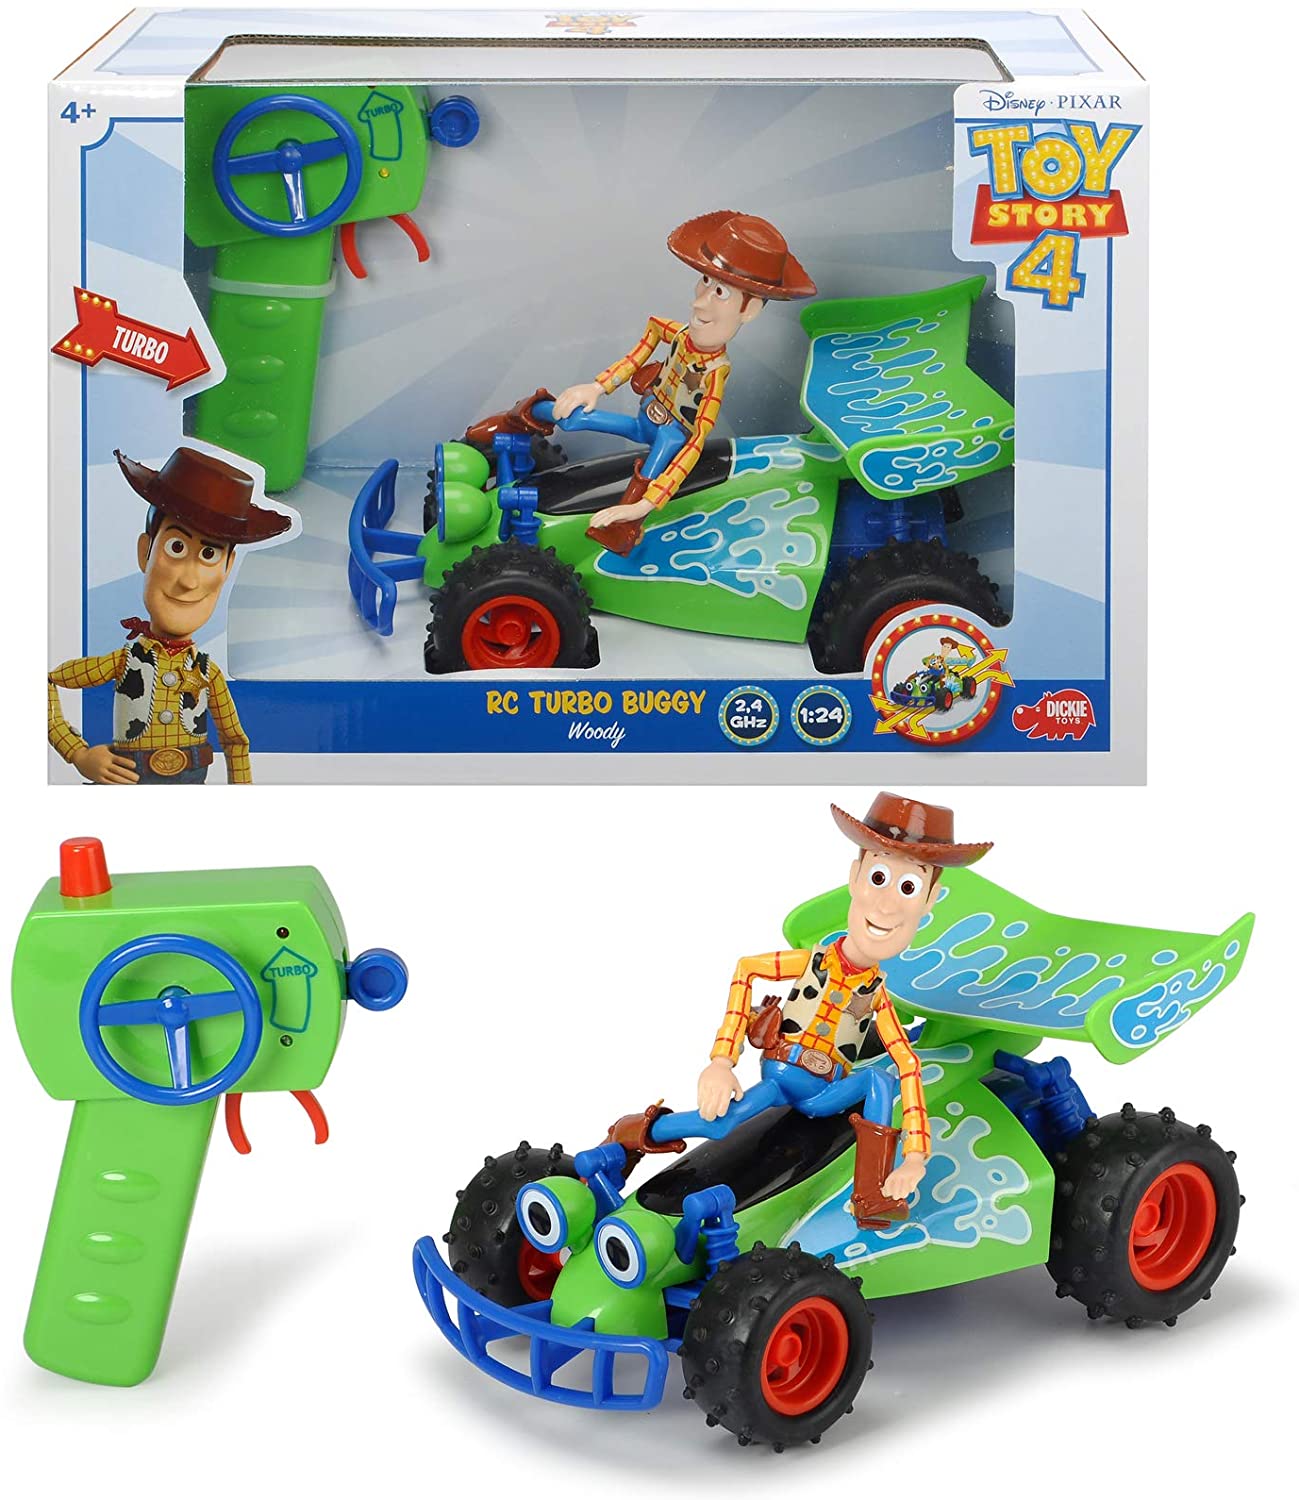 Toy Story Radio Controlled Buggy with Woddy